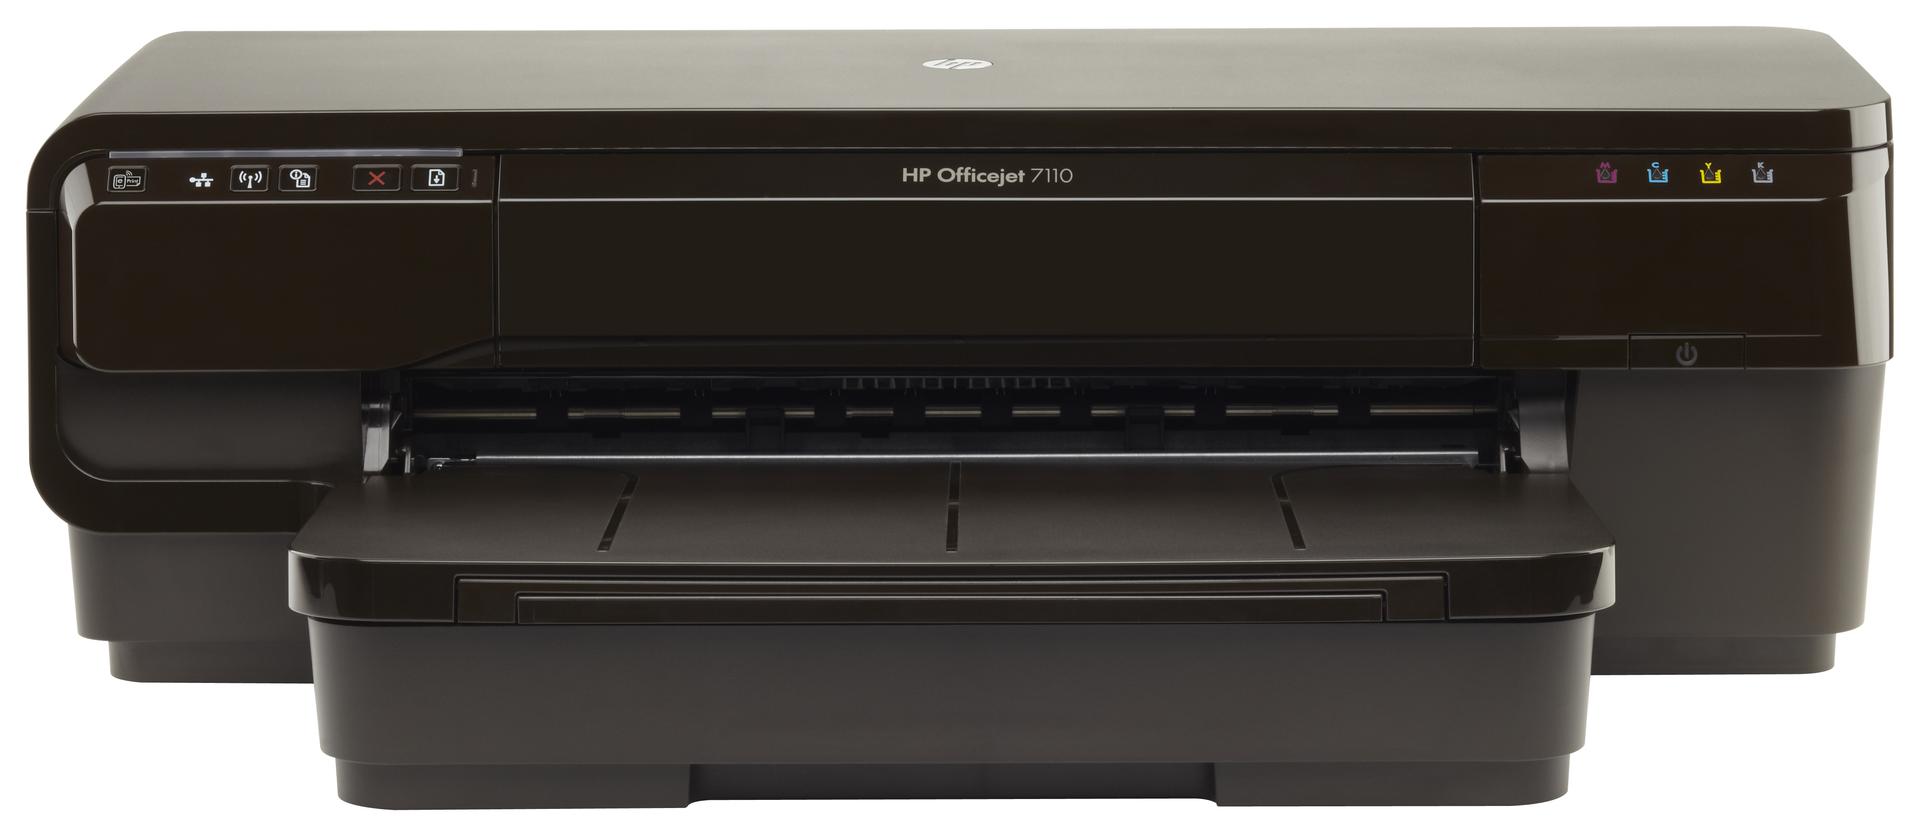 HP OFFICEJET 7110 WF EPRINTER H812A A3 | Licotronic